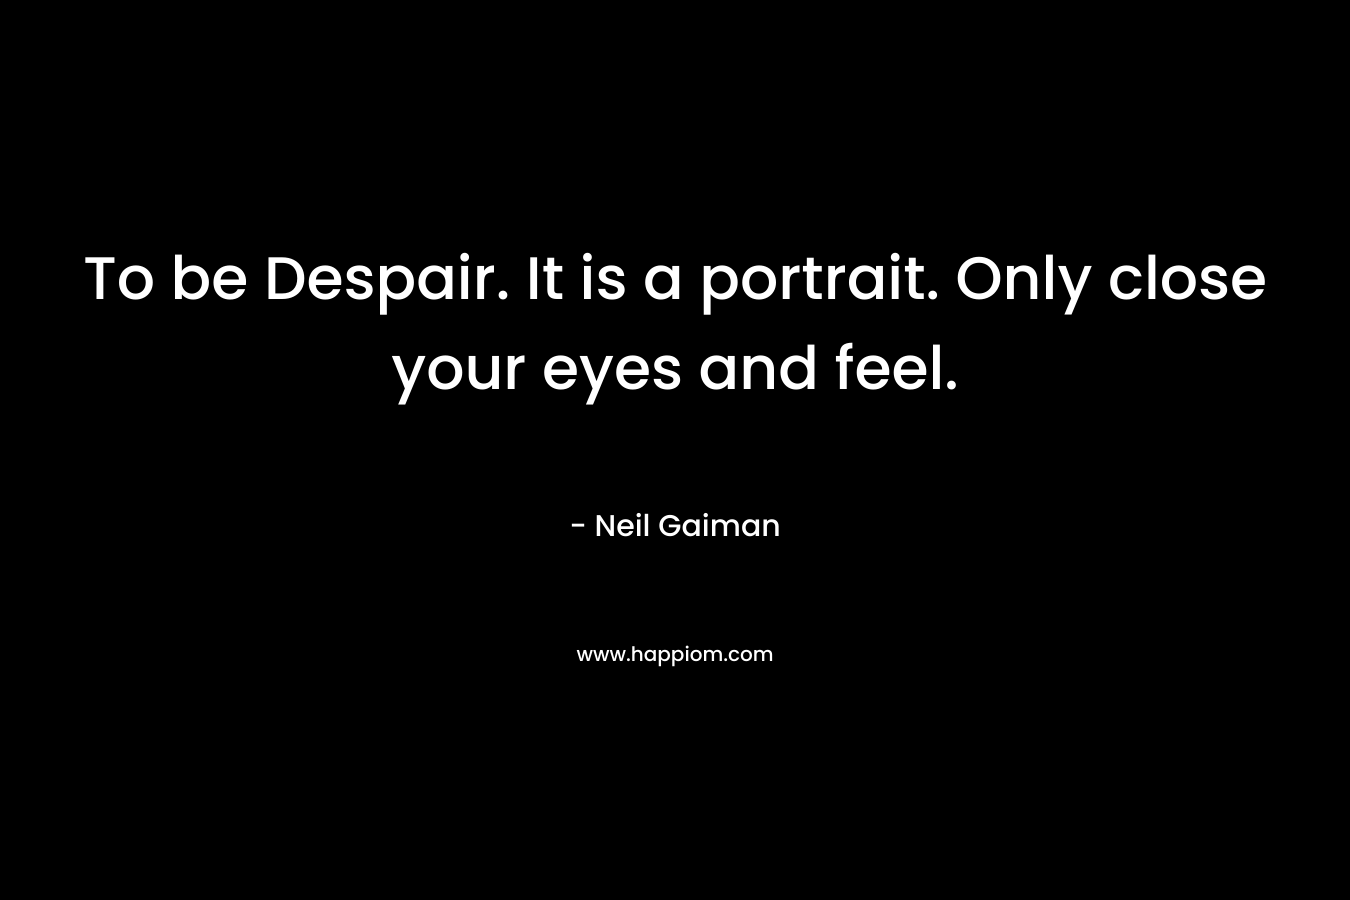 To be Despair. It is a portrait. Only close your eyes and feel.